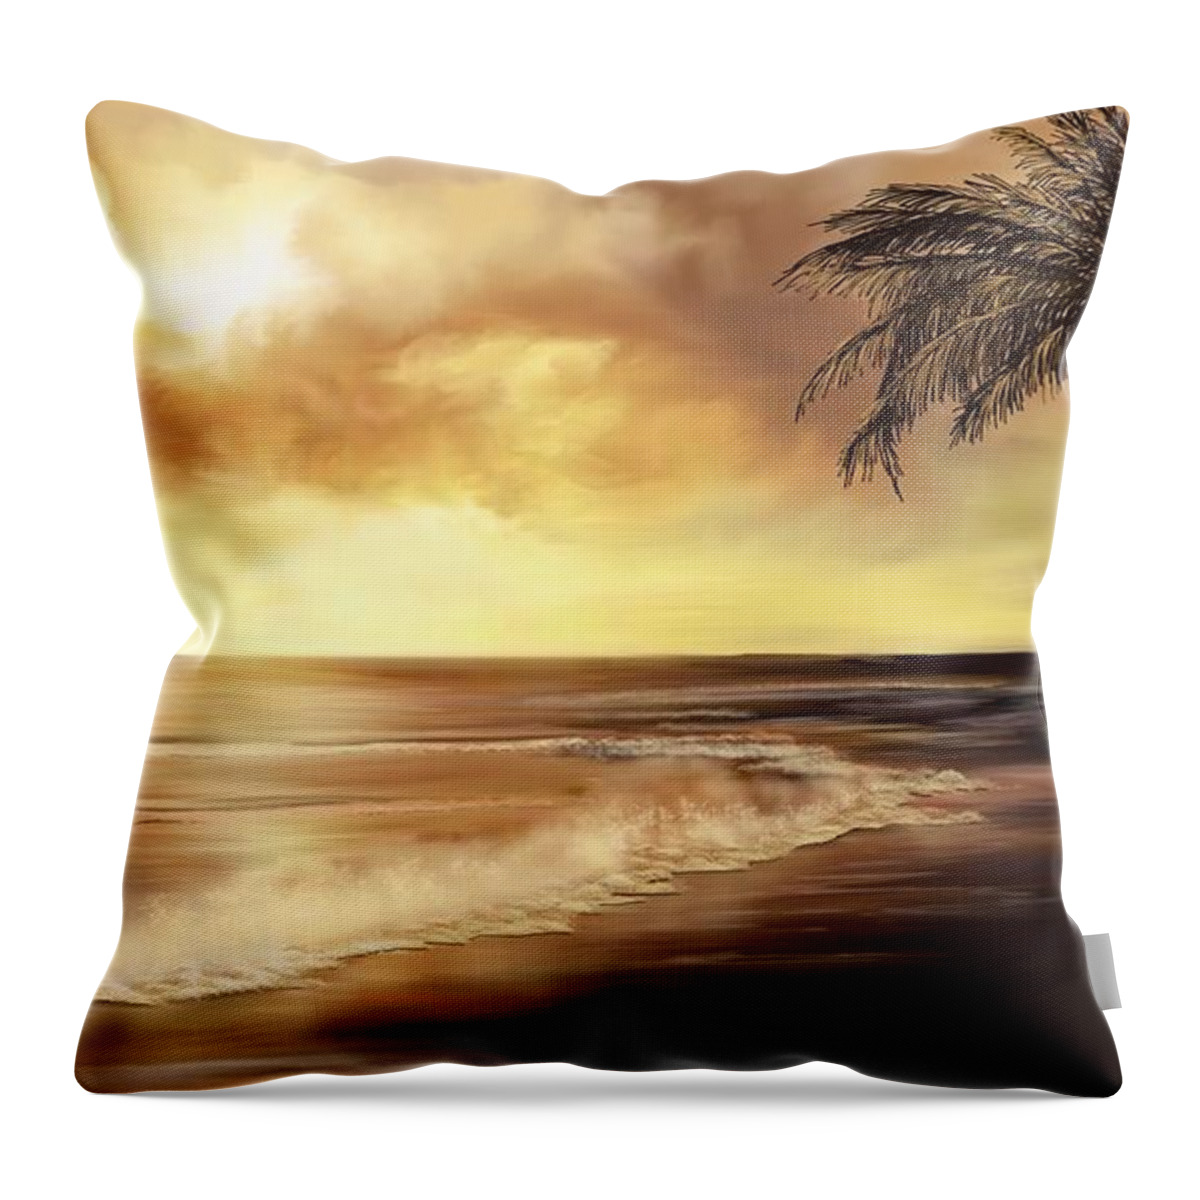 Sea Scape Art Throw Pillow featuring the digital art Golden sky over tropical beach by Anthony Fishburne